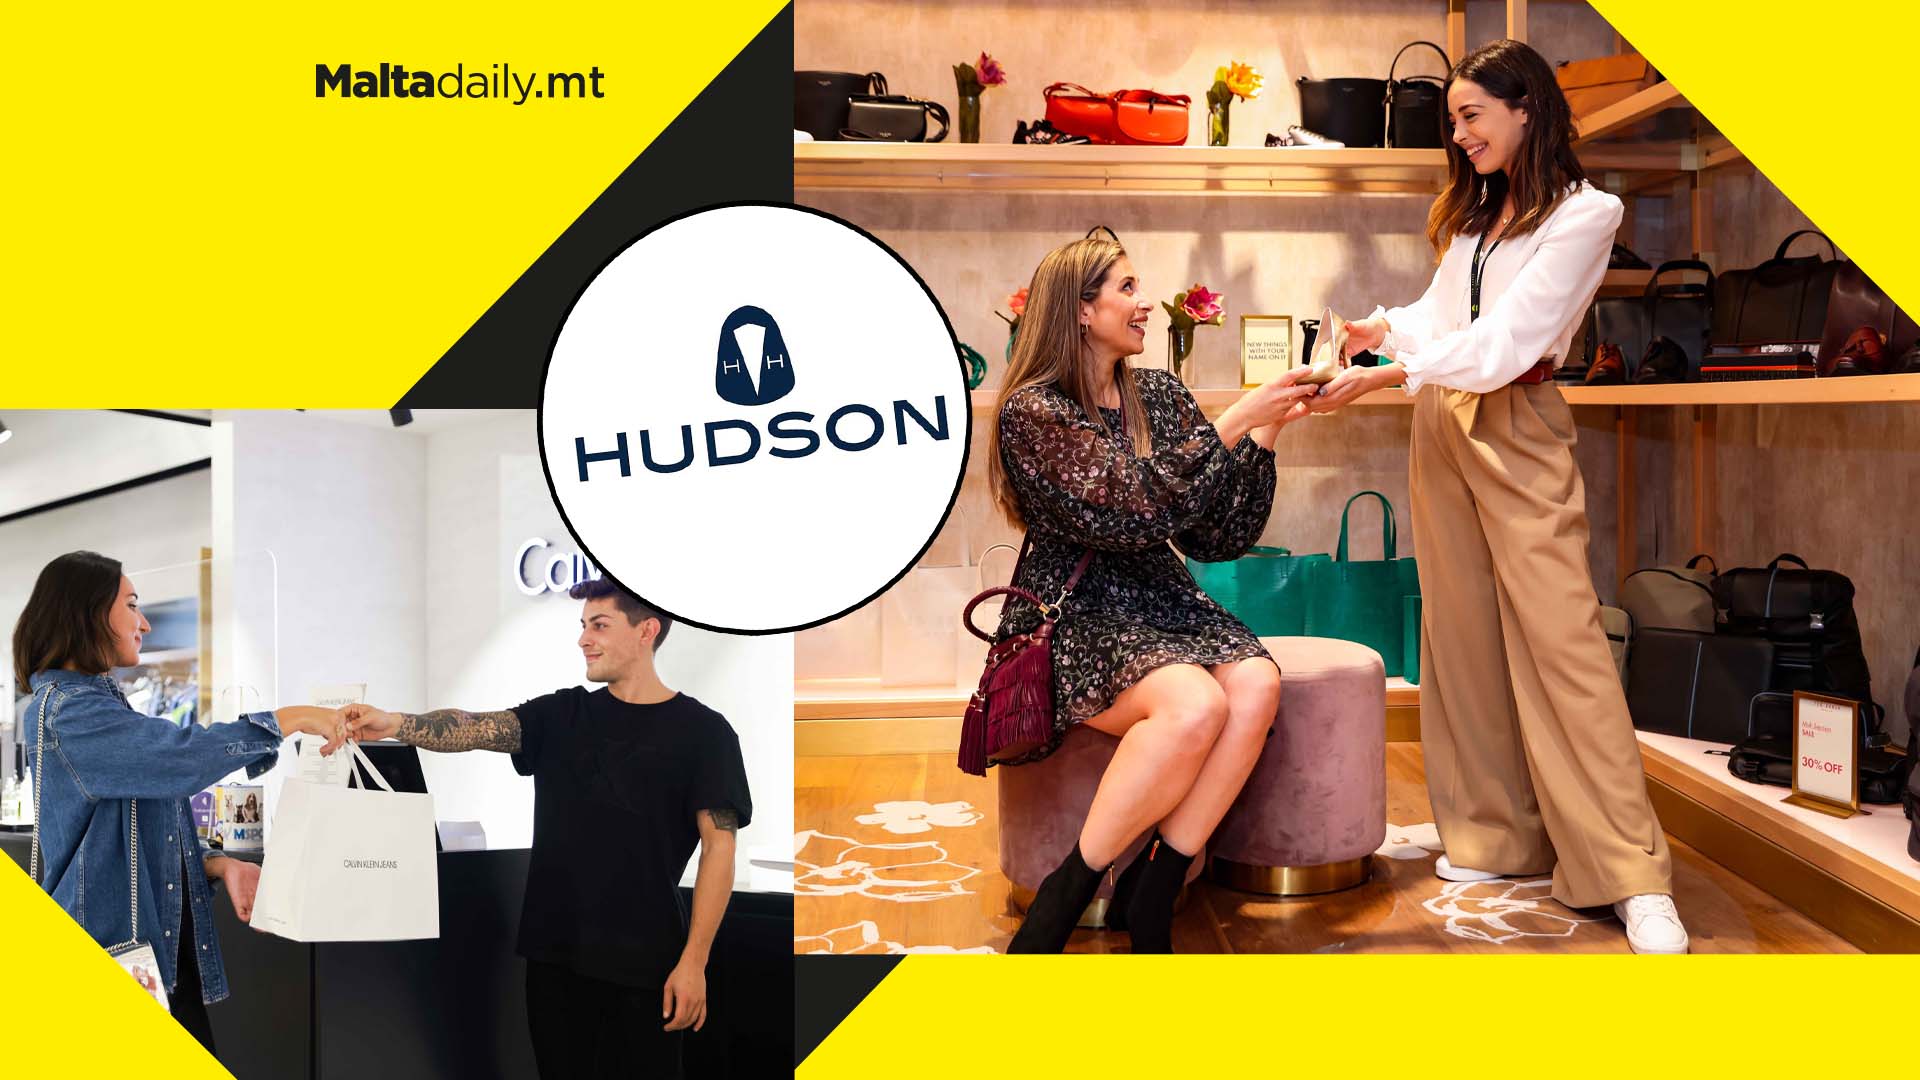 Hudson raises sales assistant wages by 11.5% to combat cost of living rise